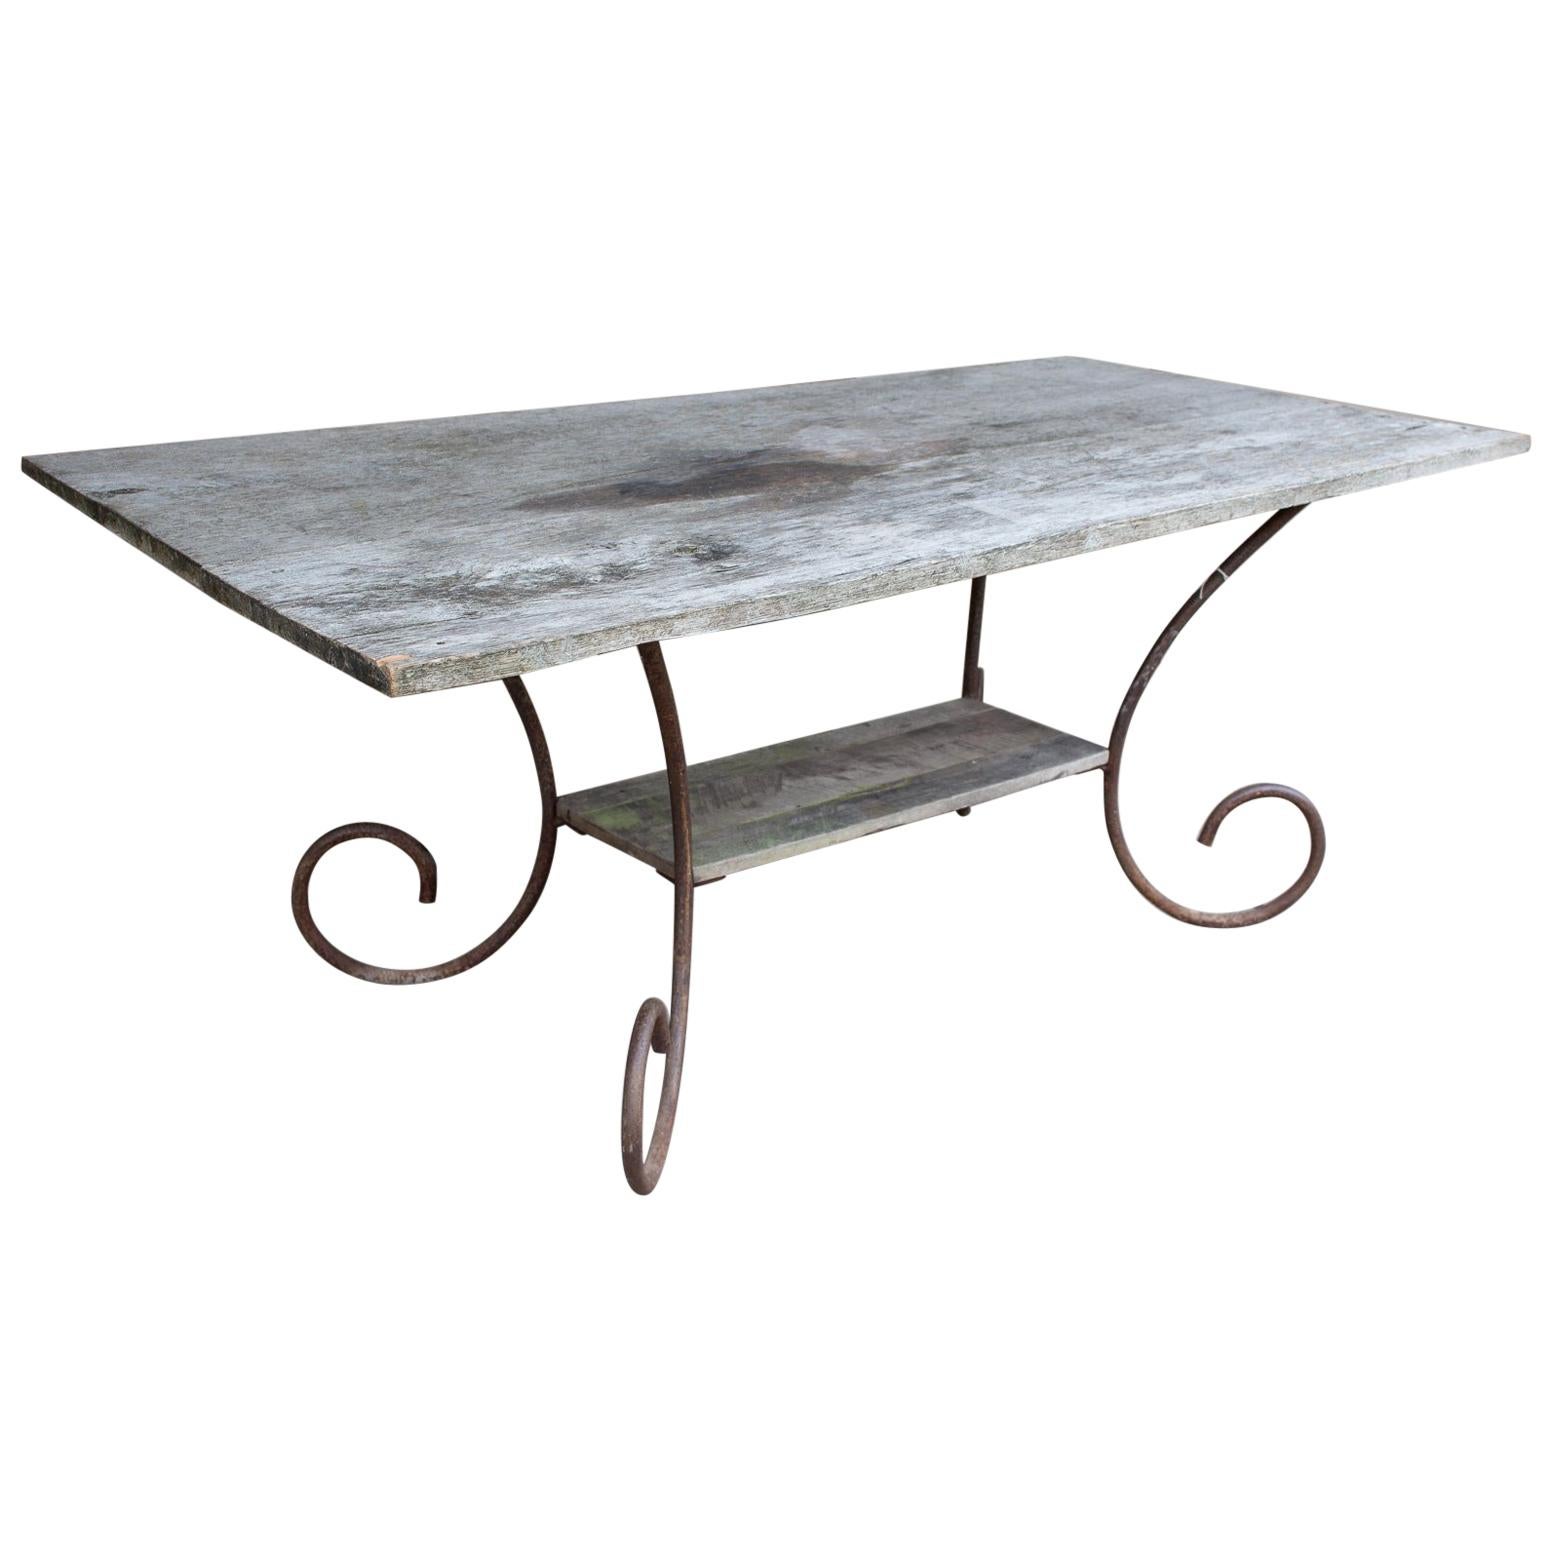 Antique French Wood and Iron Table from a Flower Shop in Paris